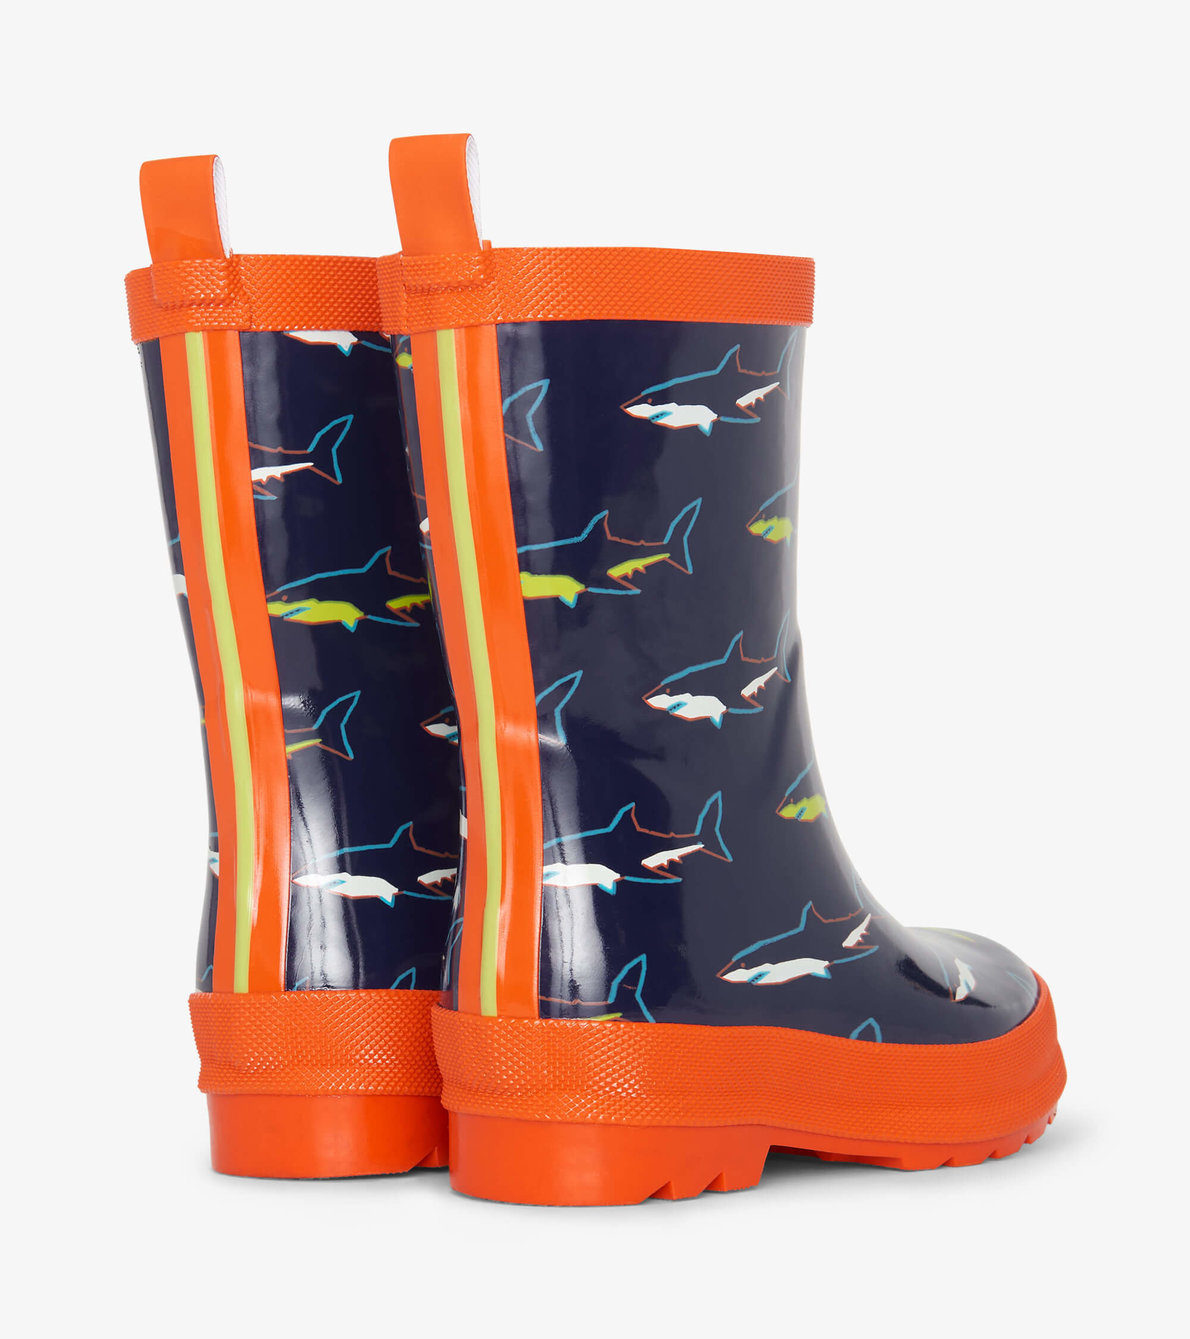 View larger image of Boys Shark Shiny Wellies